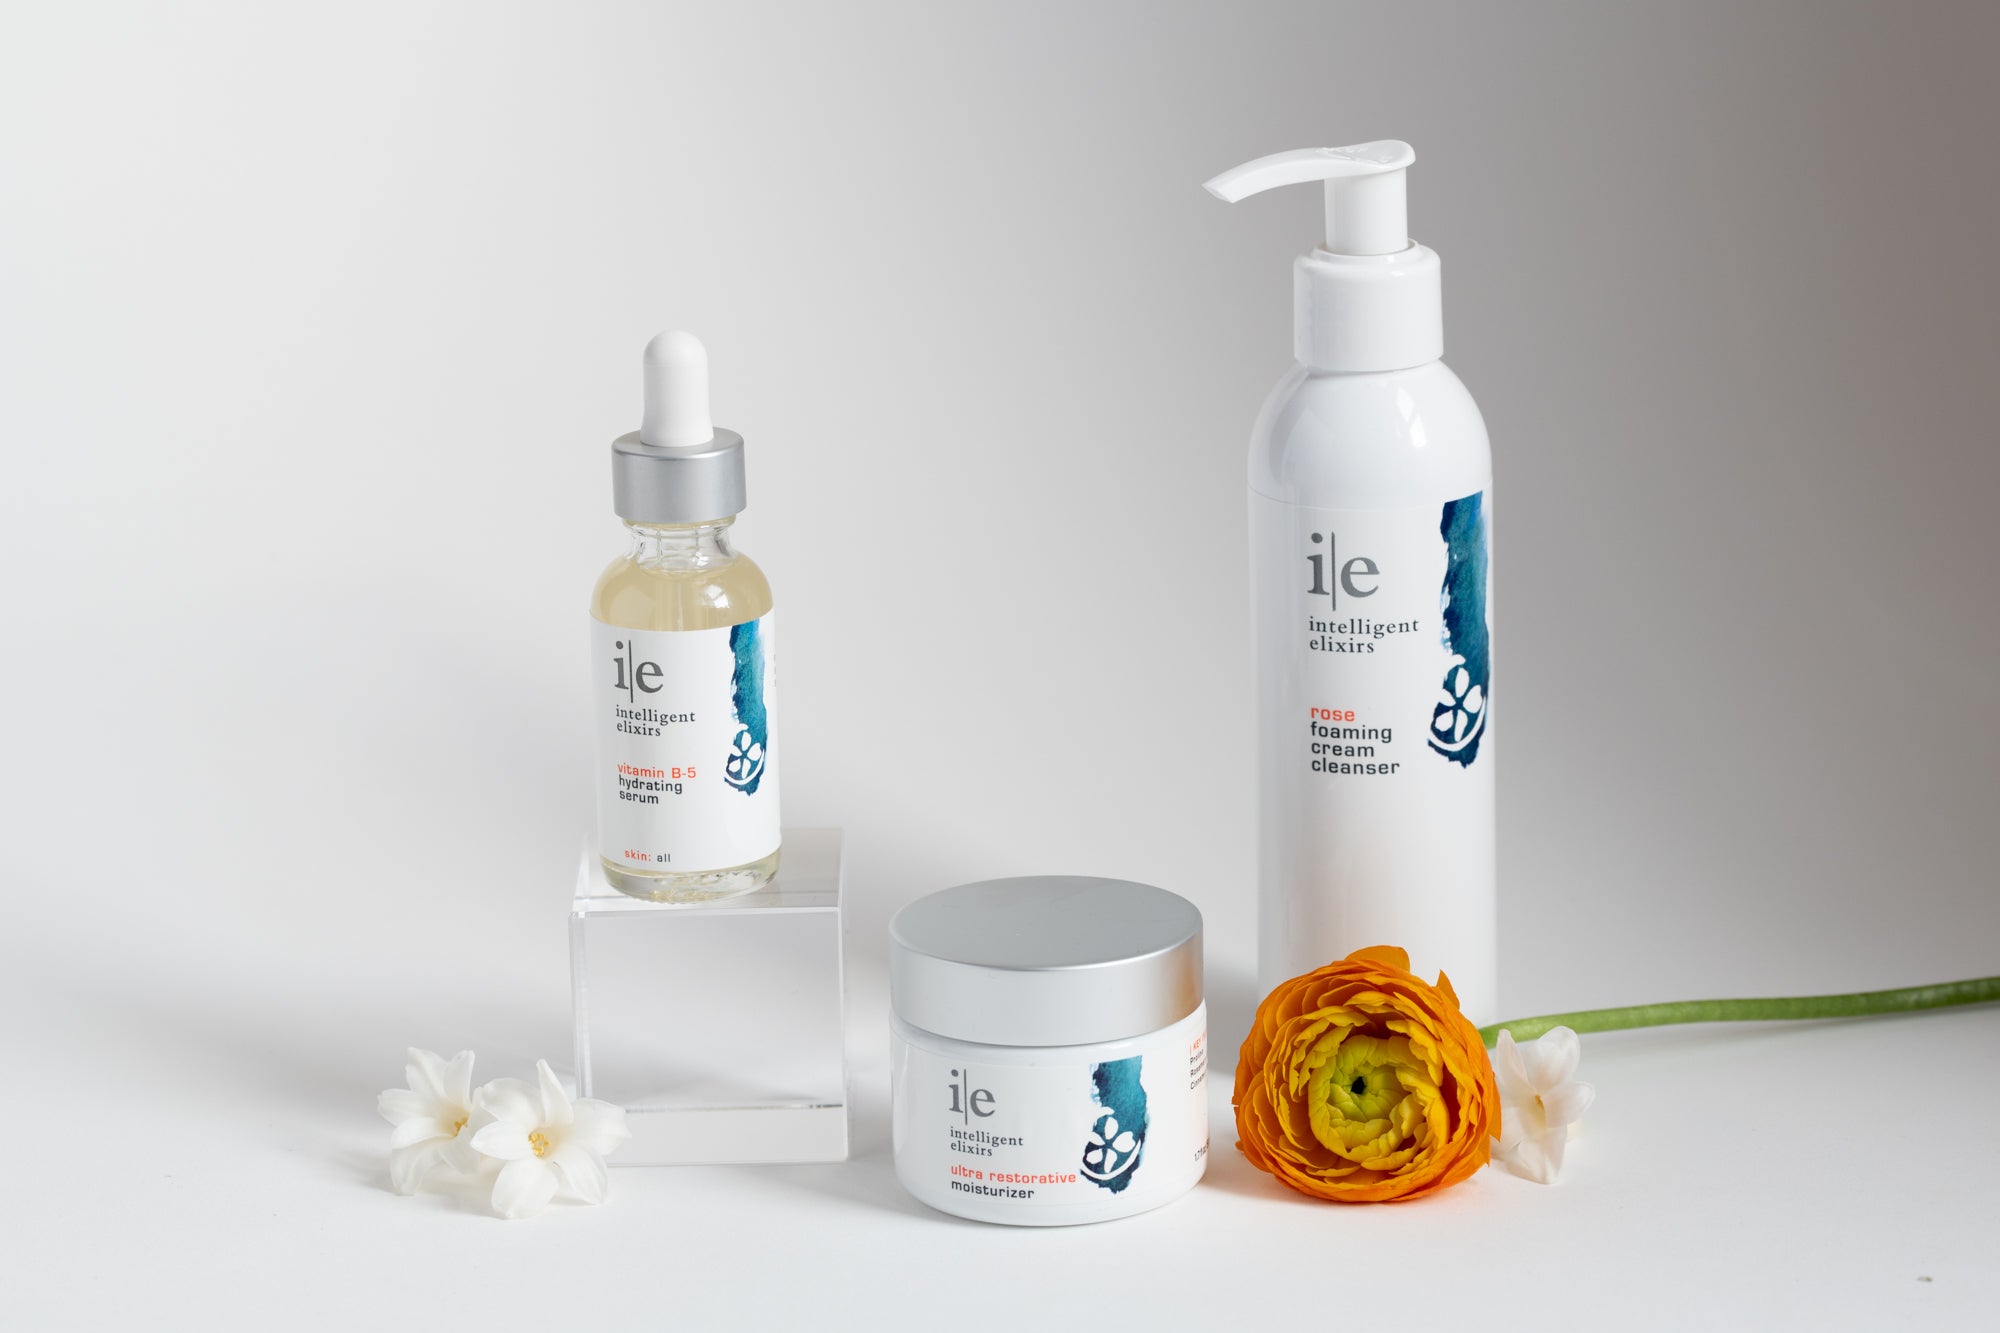 These products utilize ingredients to maintain internal hydration and surface moisture.  